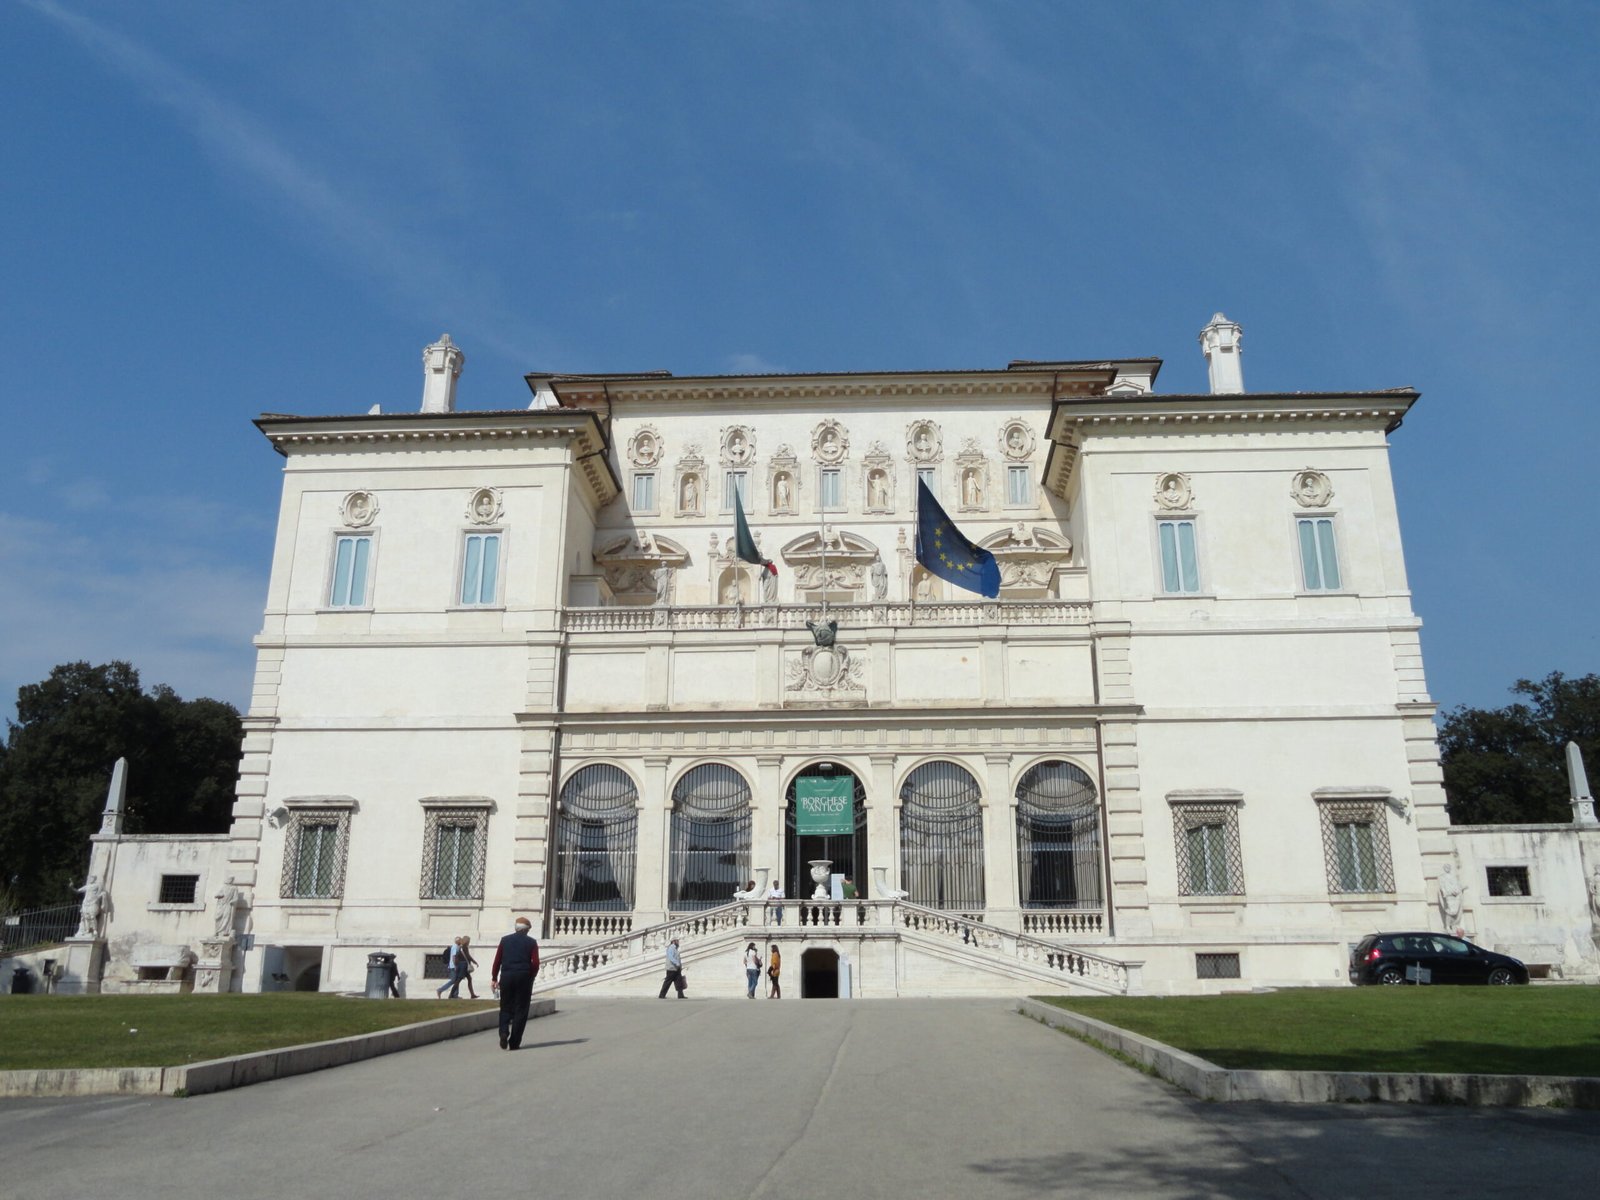 Villa Borghese in Rome Italy has amazing art collection and the Borghese Gardens are not to be missed.